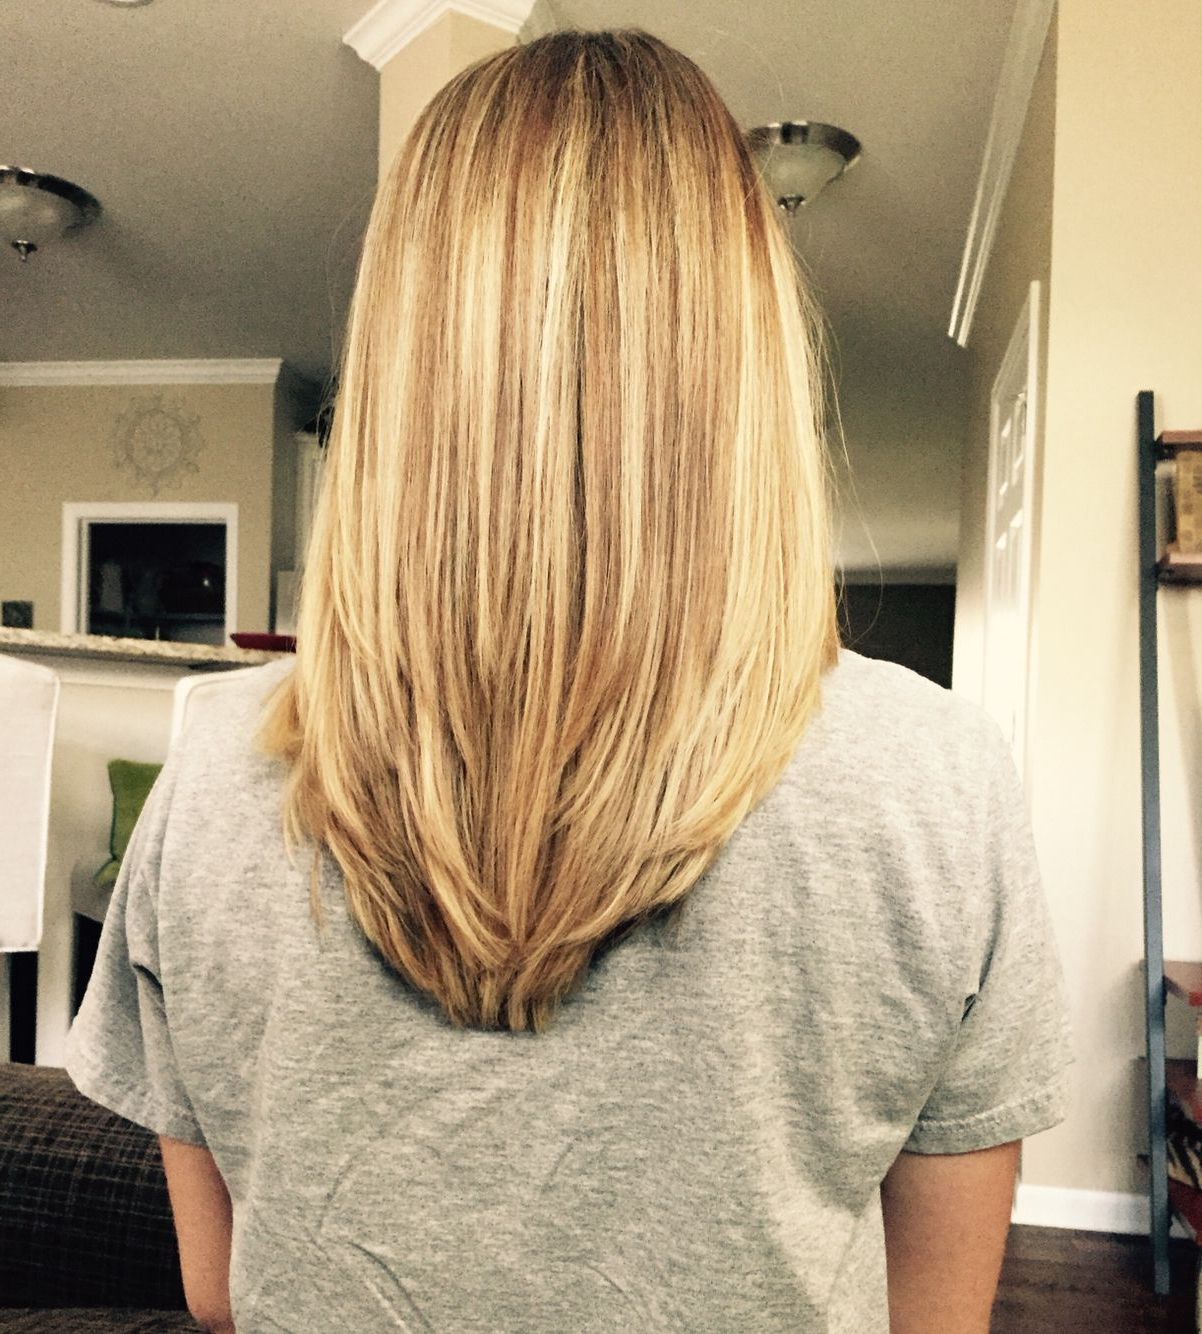 V Shape In The Back With Some Long Layers! My New Hair Style (View 5 of 20)